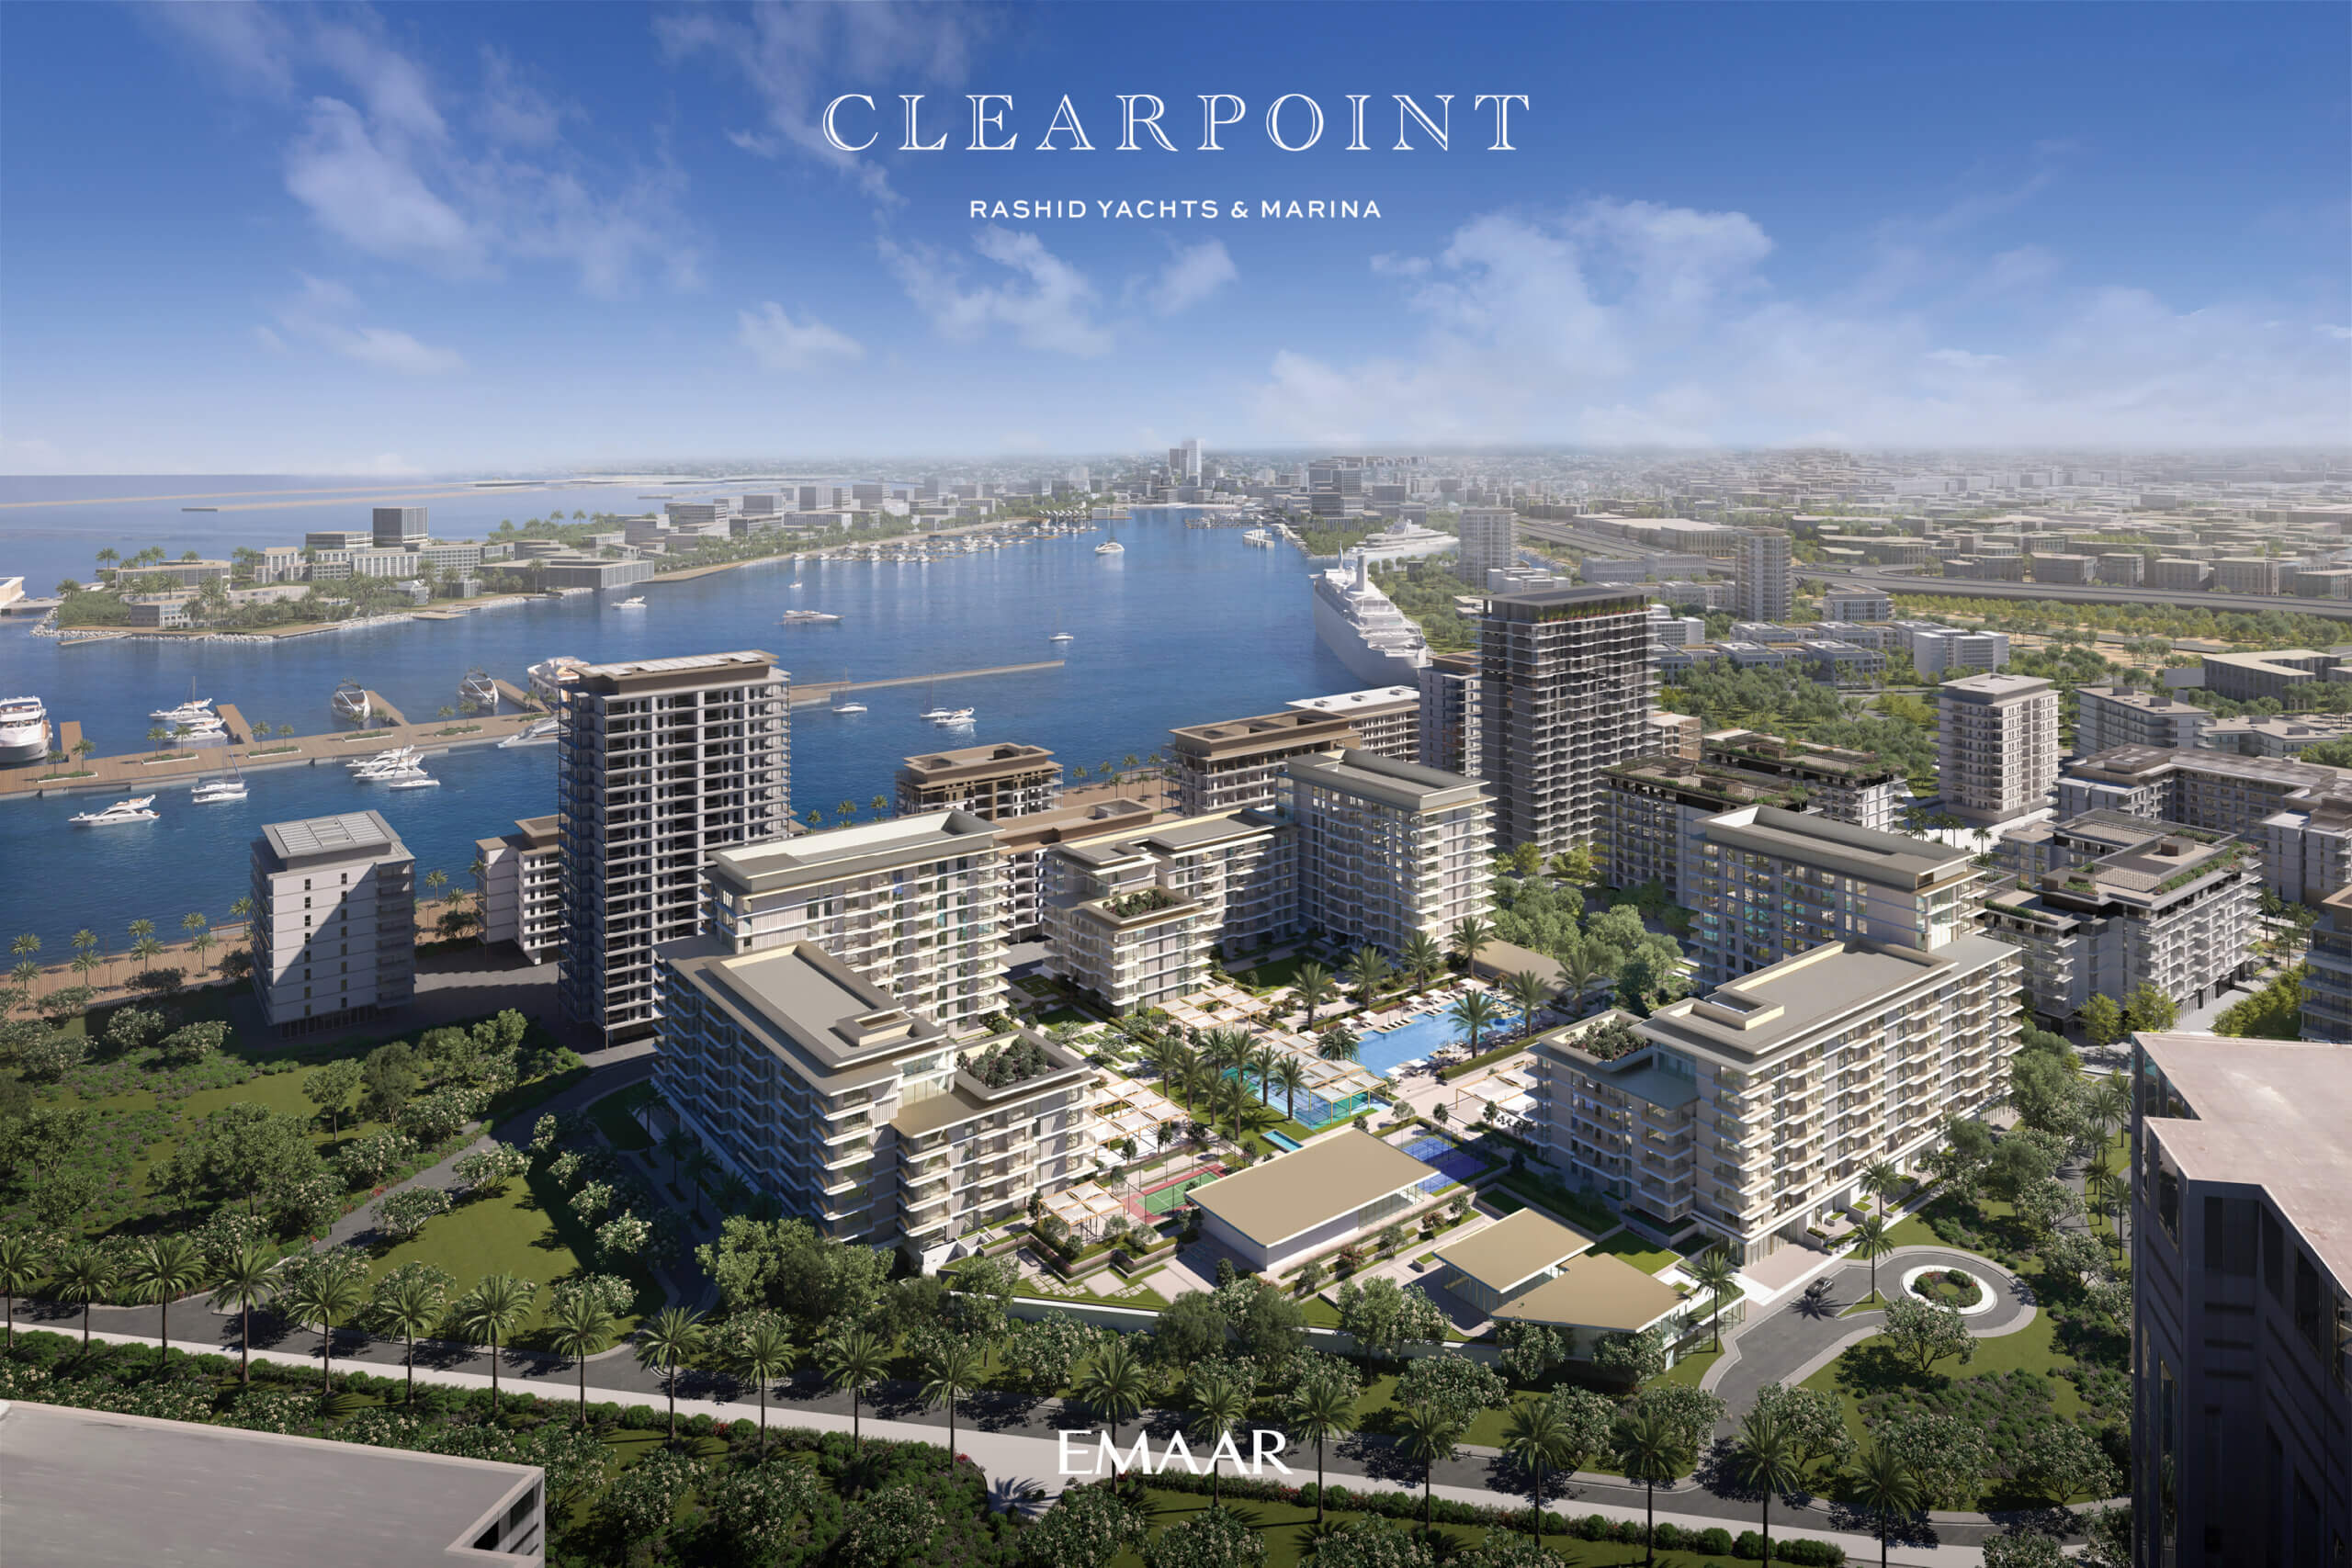 Exterior view of CLEARPOINT properties in Dubai, represented by PJ International Estate Agency. Discover luxurious real estate options with stunning outdoor vistas in the heart of Dubai's vibrant property market.